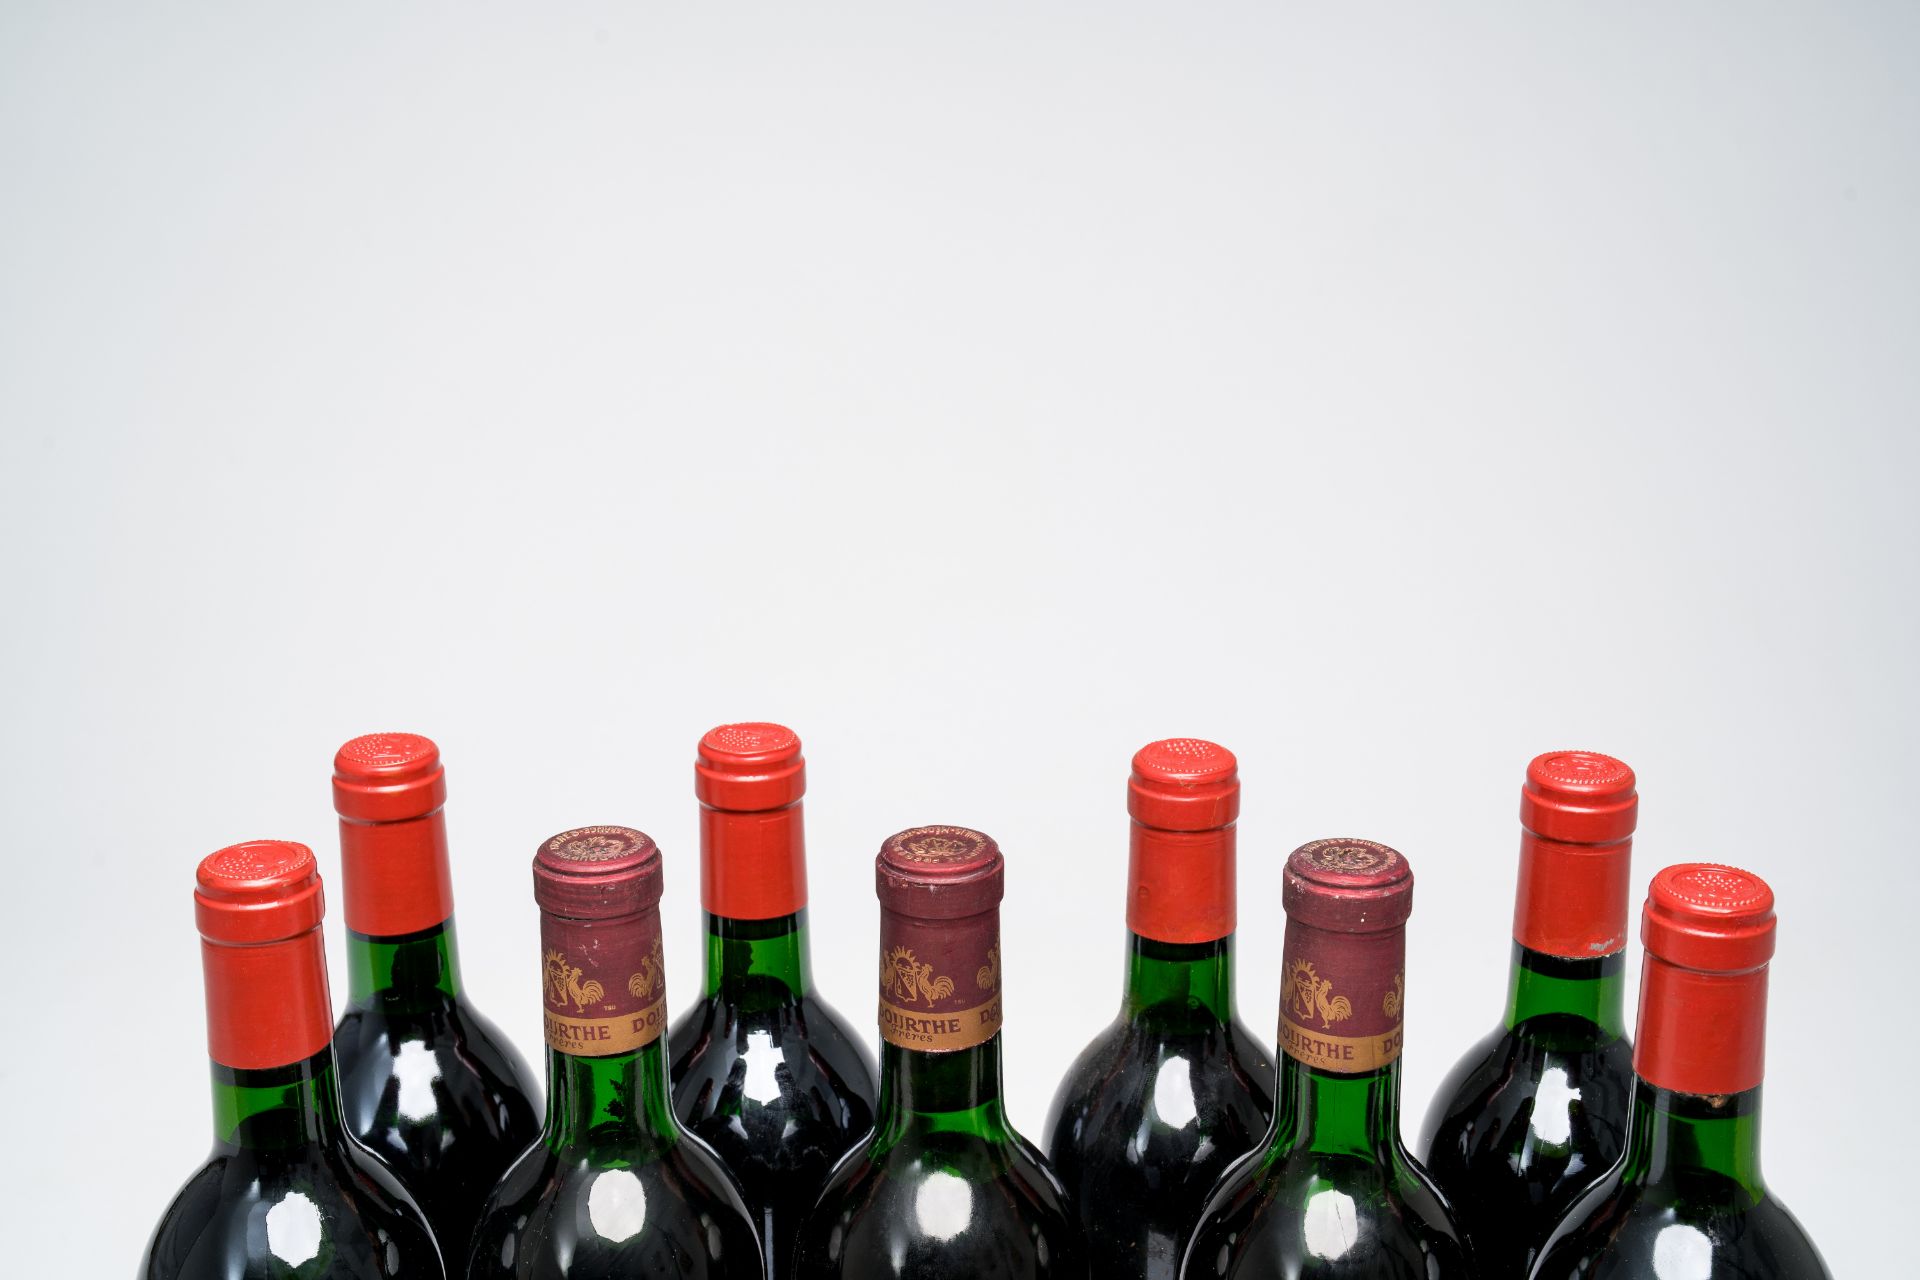 Three bottles of Chateau Labegorce and six bottles of Chateau Canuet, Margaux, 1966 and 1985 - Image 3 of 3